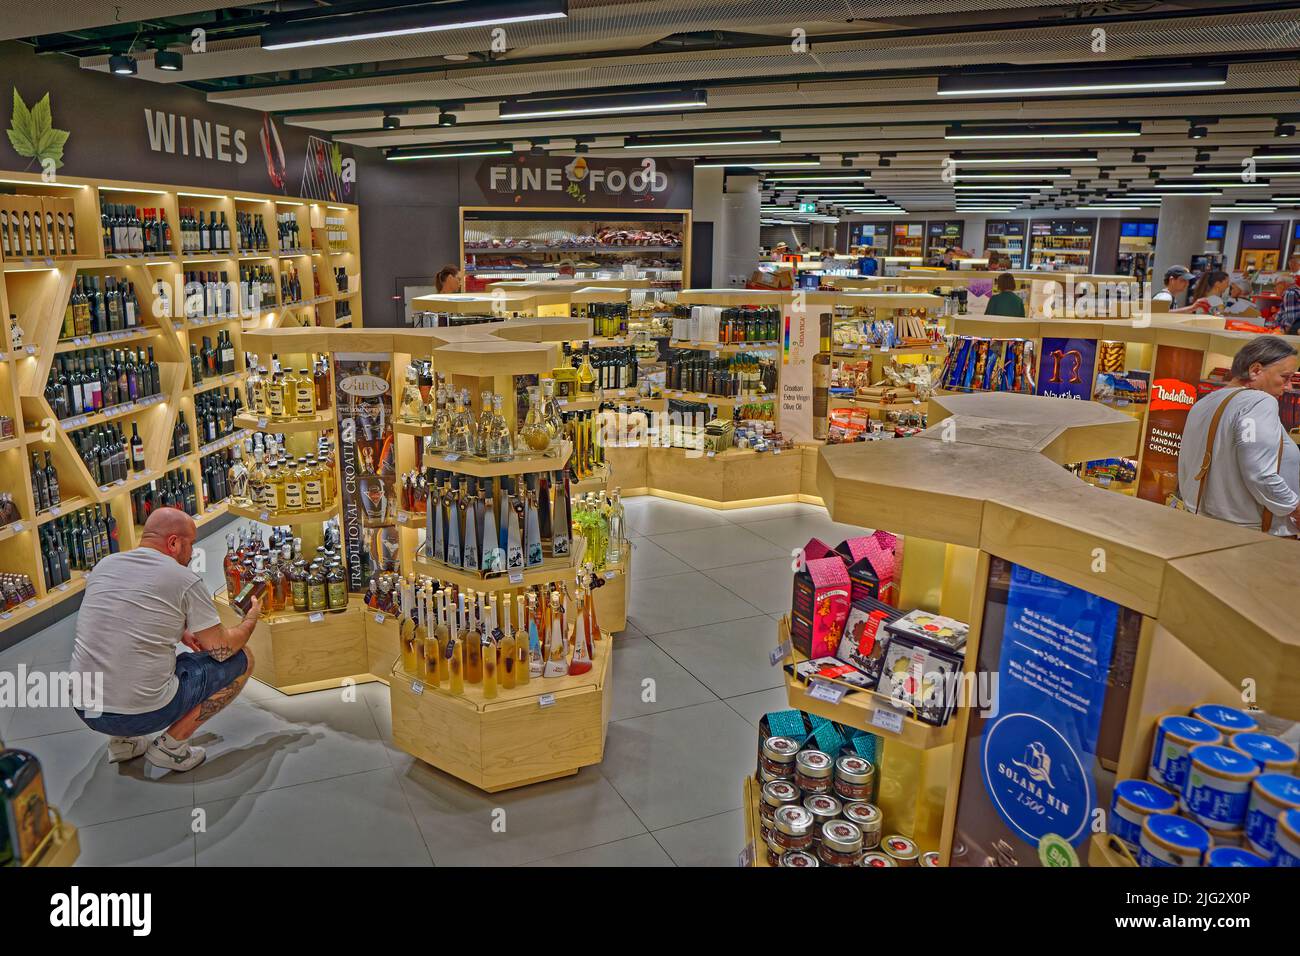 Duty Free shopping at Resnik Airport, Croatia or Split Airport as it is commonly known. Stock Photo